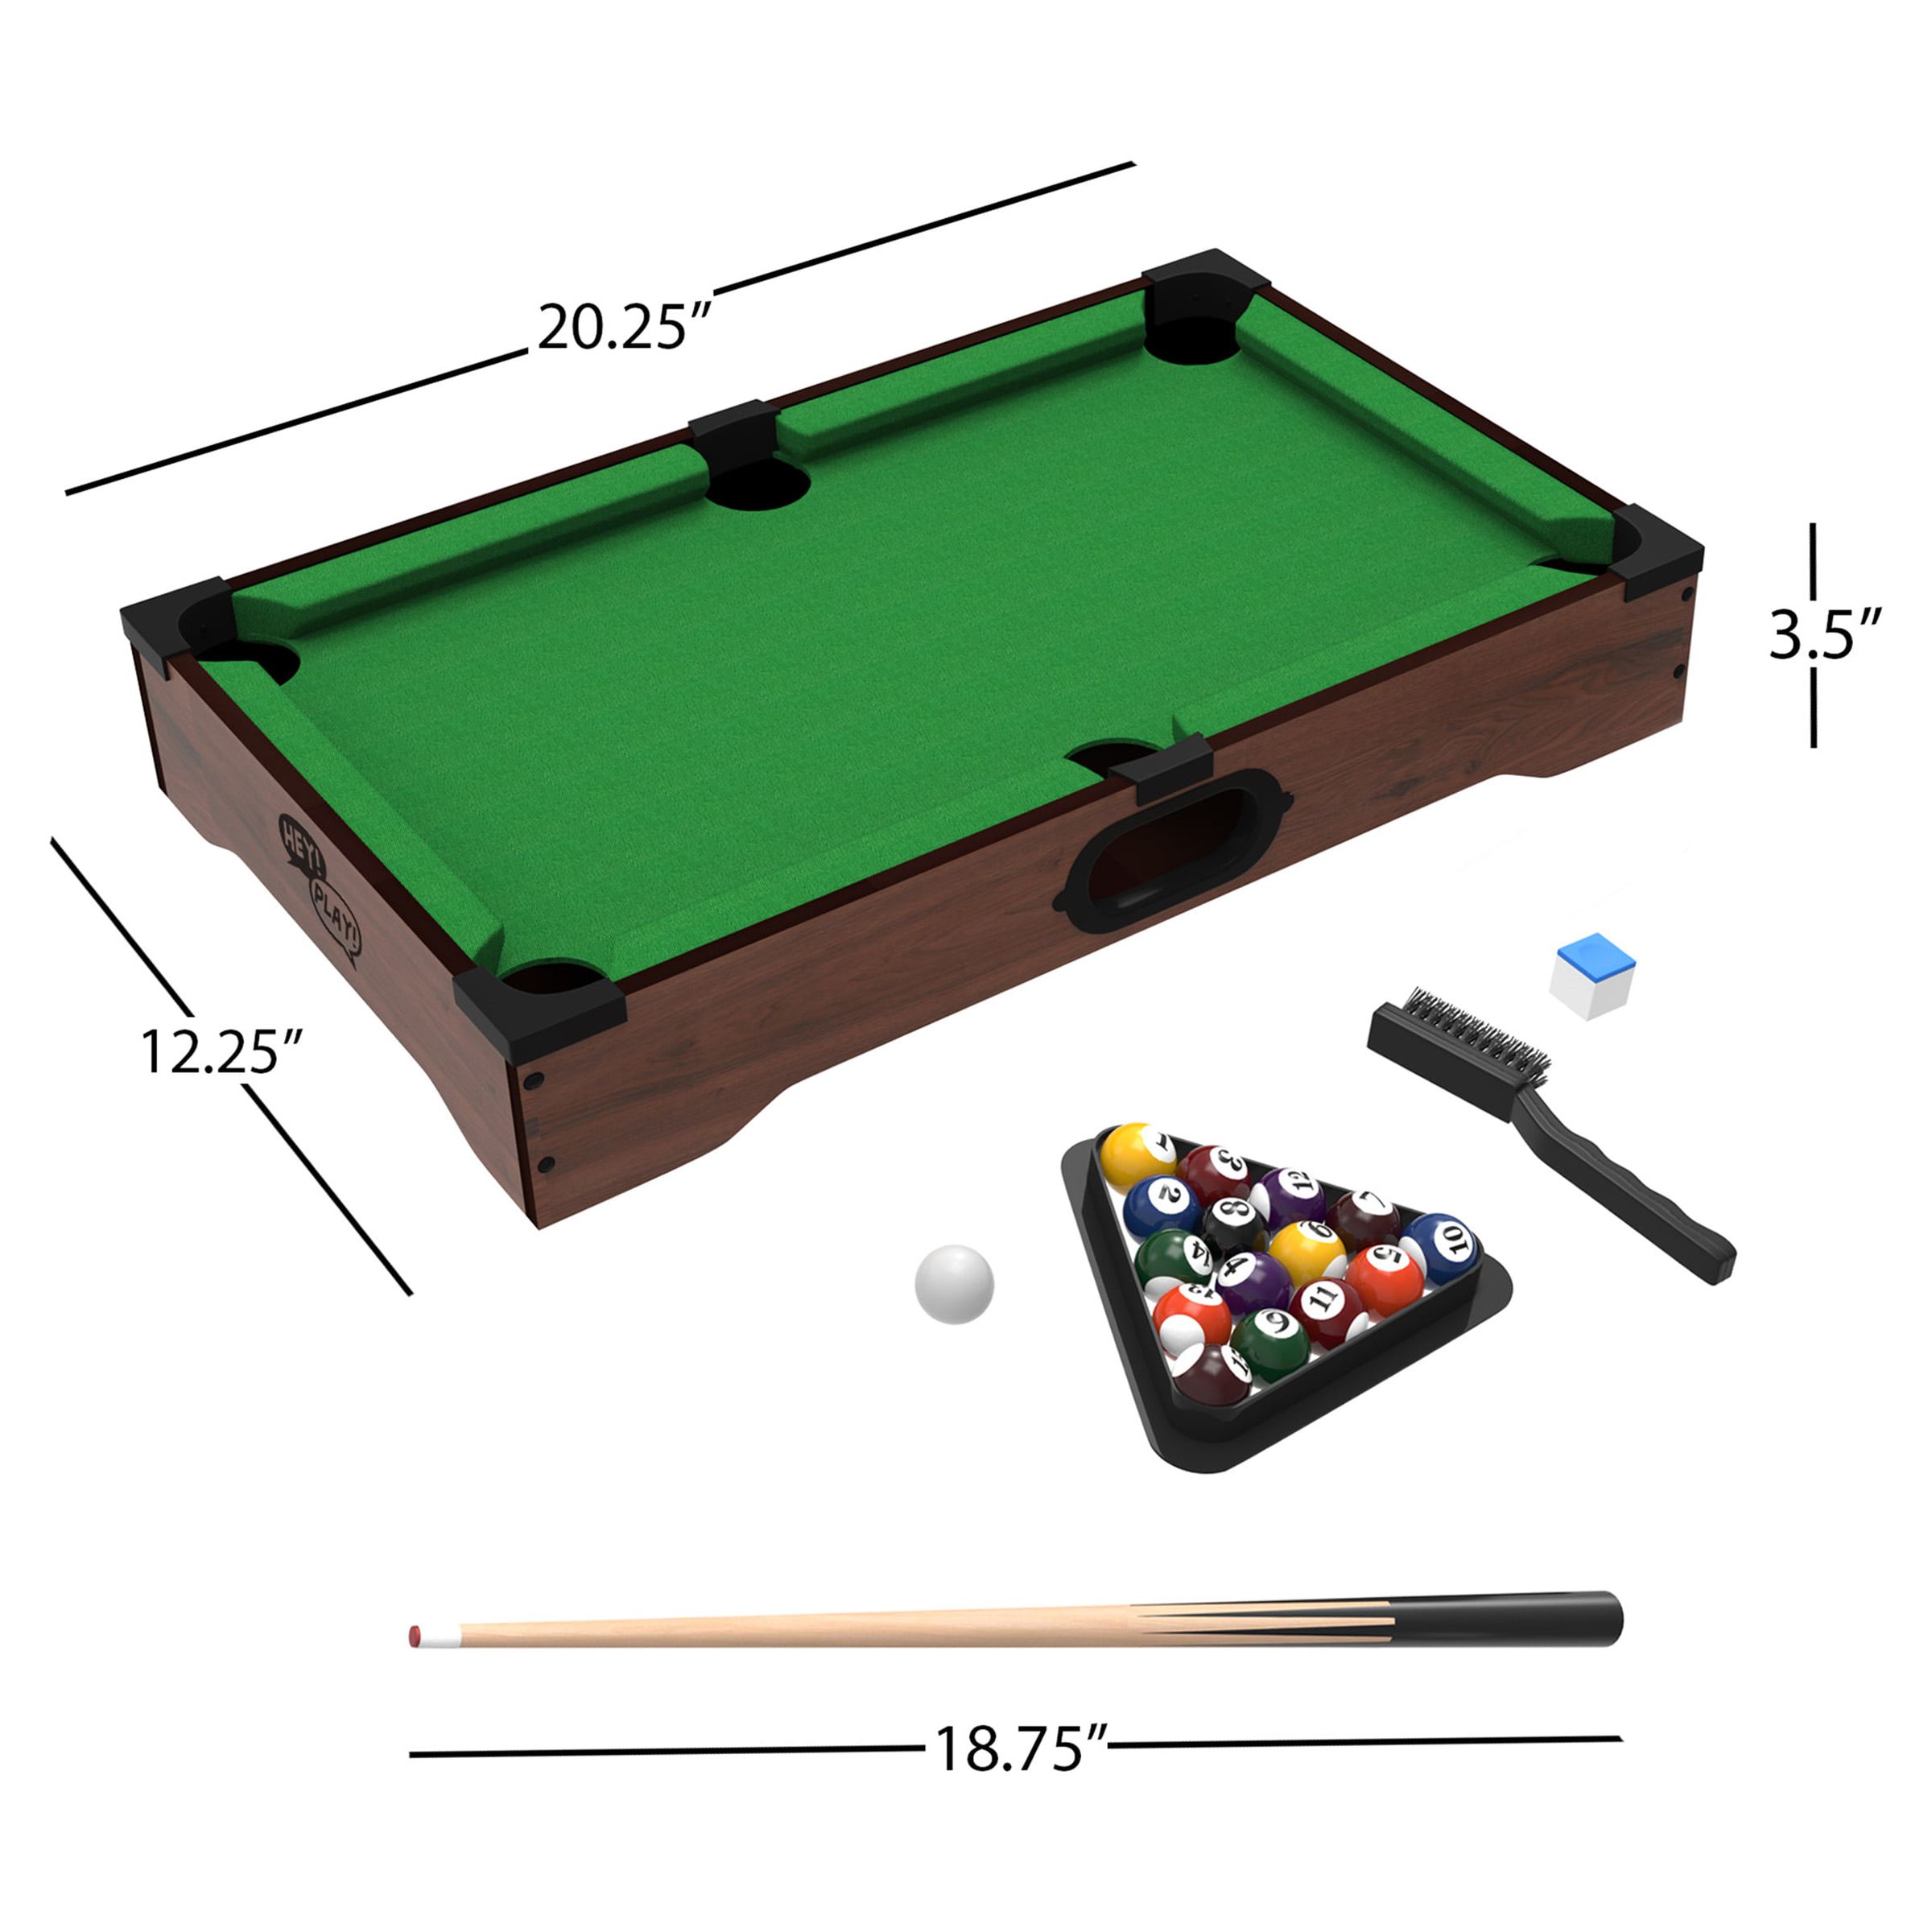 Trademark Games Mini Pool Table Set with Sticks, Cue Balls, Chalk, and More - image 2 of 6